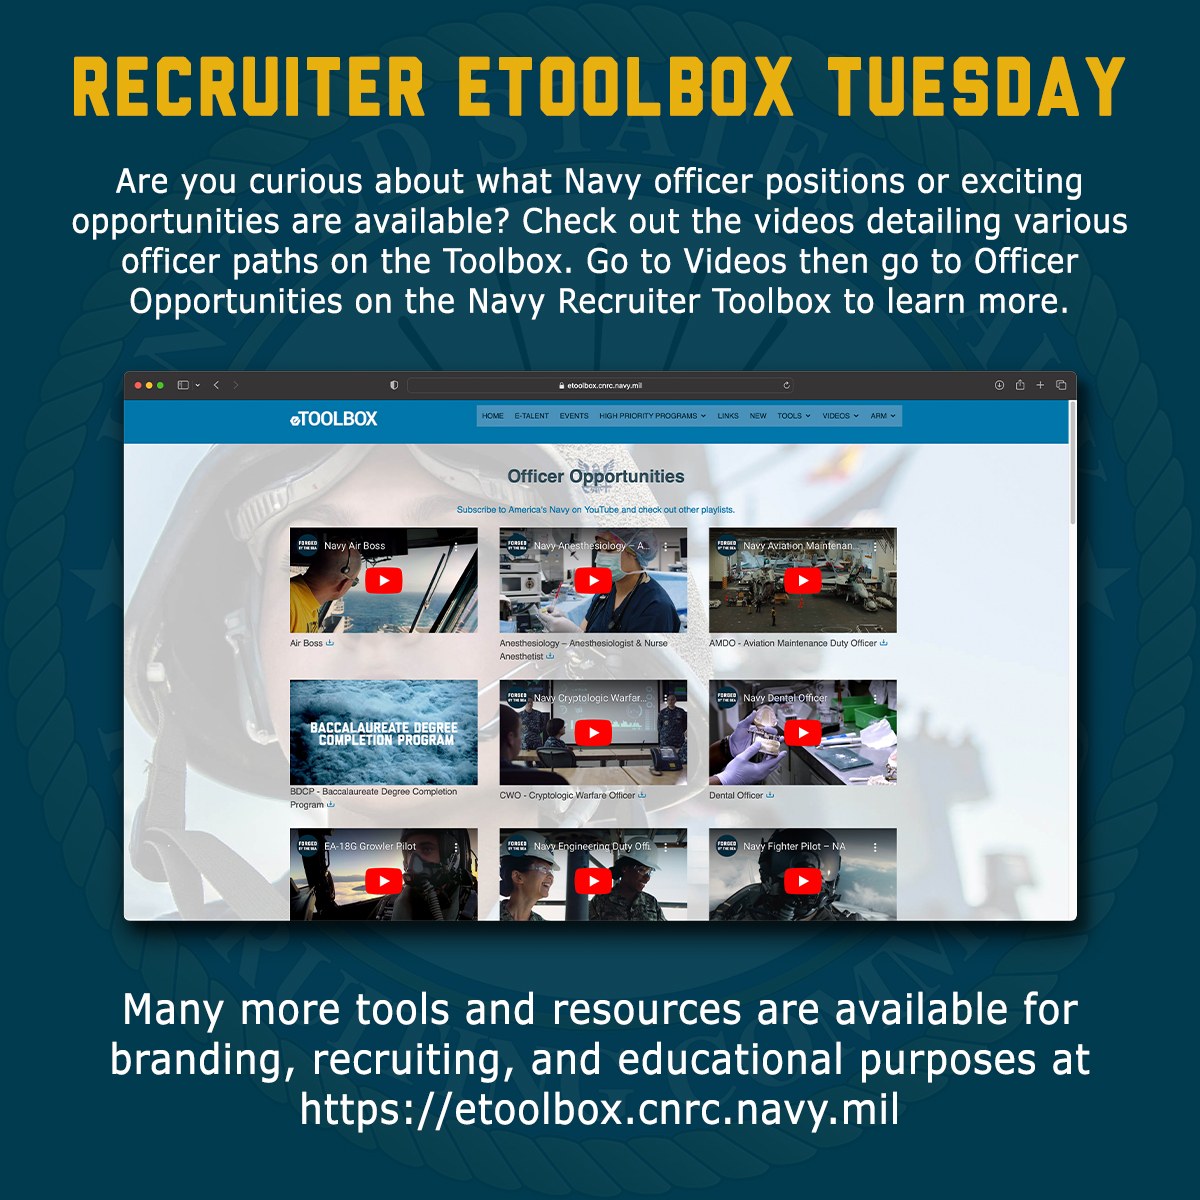 and resources available.
etoolbox.cnrc.navy.mil

#USNavy #Recruiting #Forgedbythesea